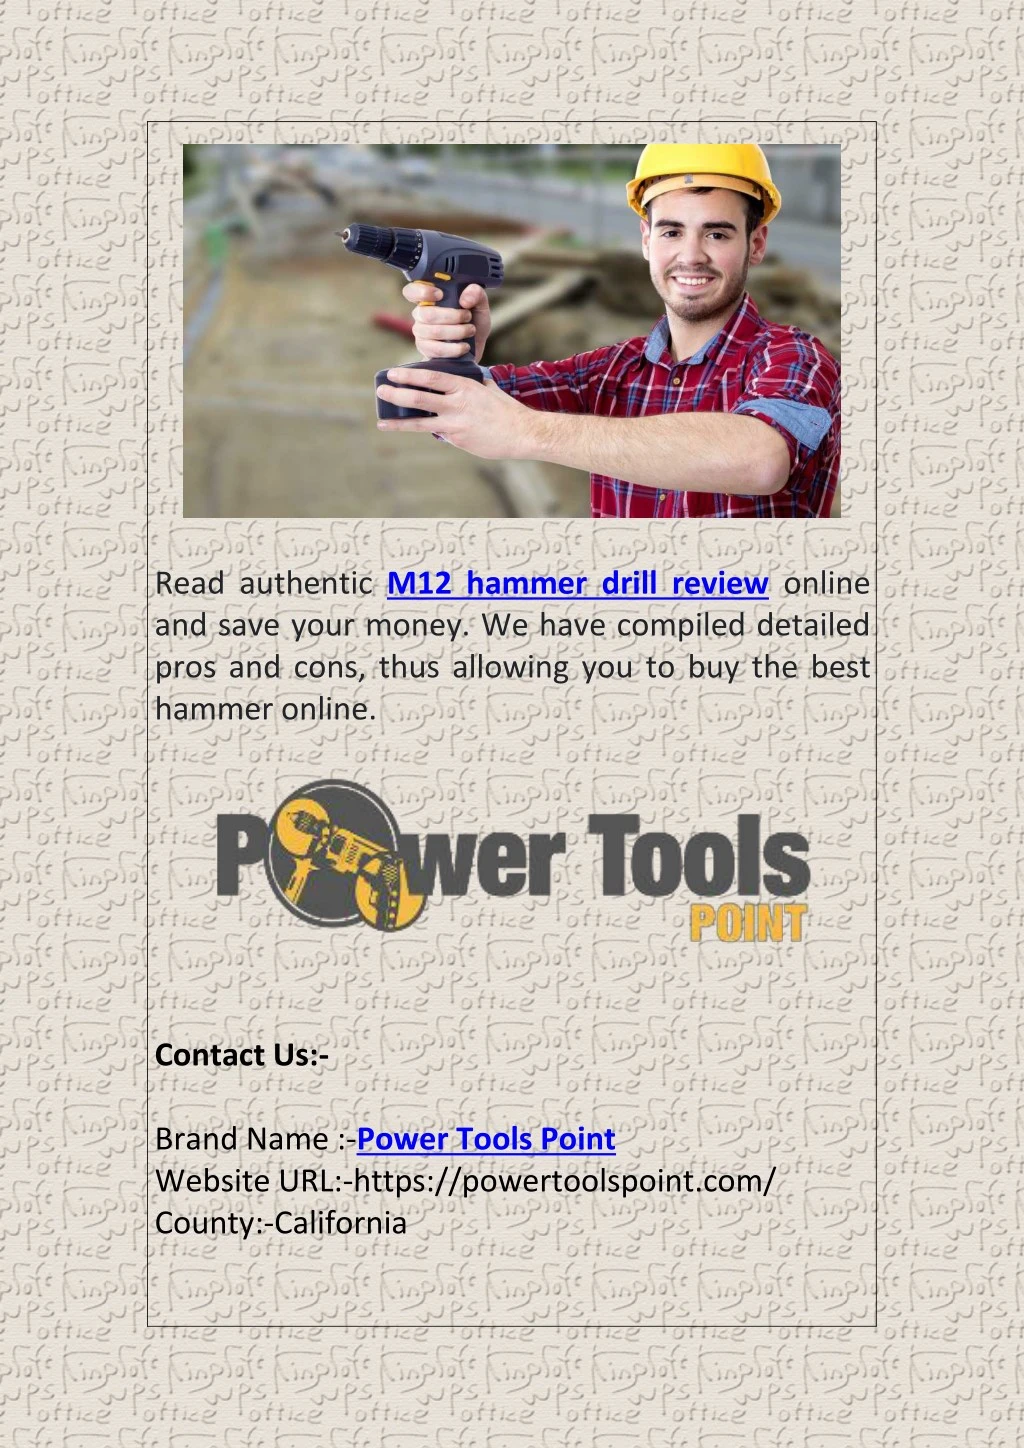 read authentic m12 hammer drill review online